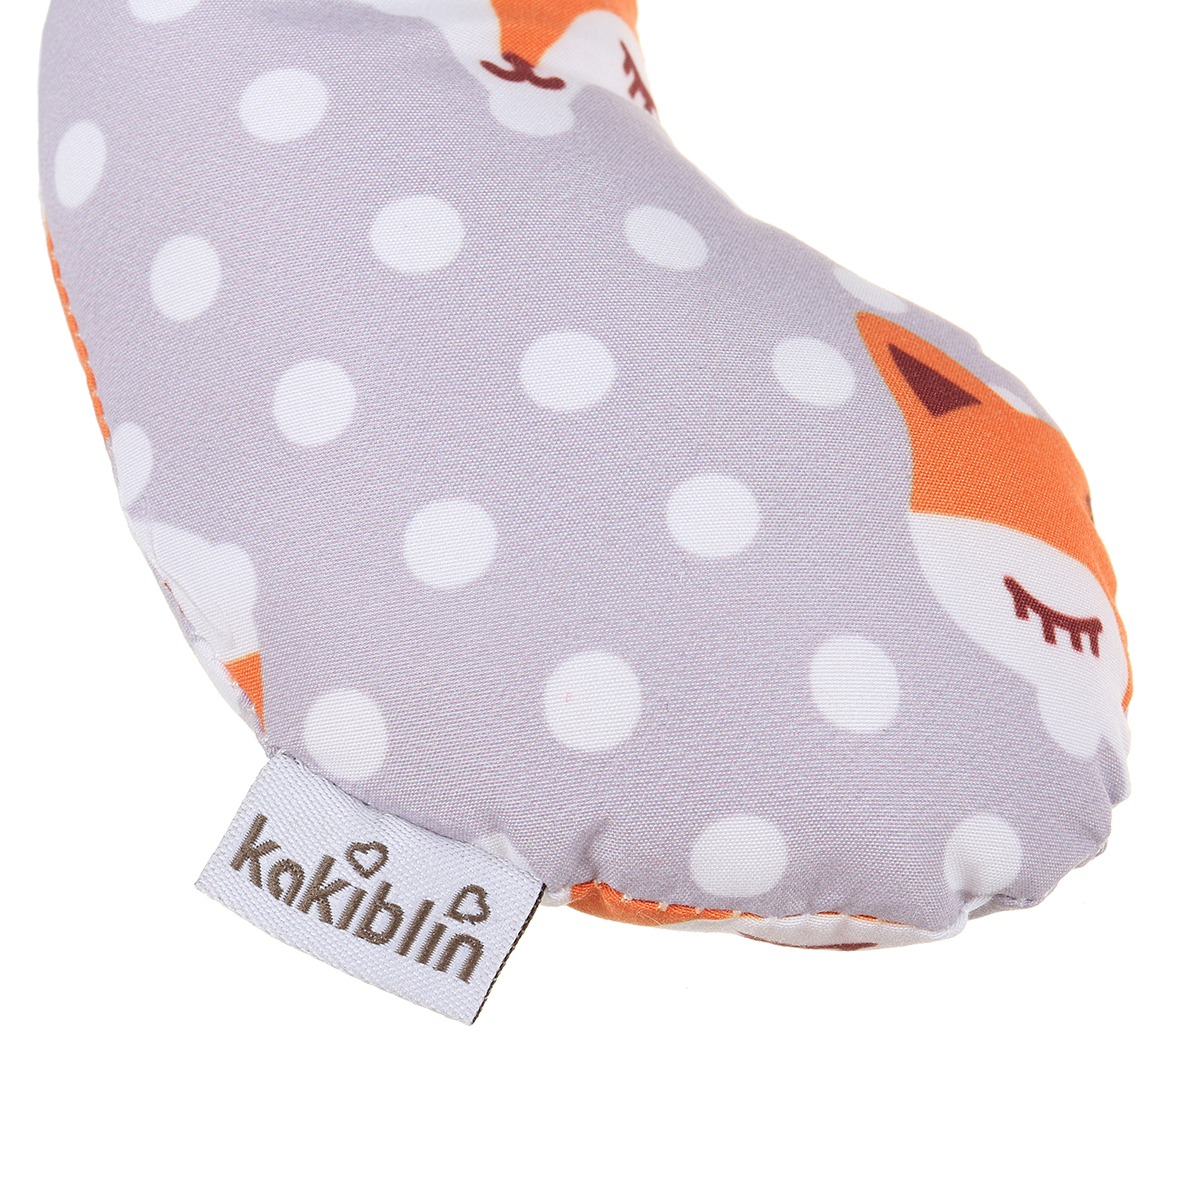 Cotton-U-shaped-Pillow-Baby-Stroller-Car-Seat-Cushion-Pad-Comfortable-Breathable-Kids-Body-Support-P-1761693-8